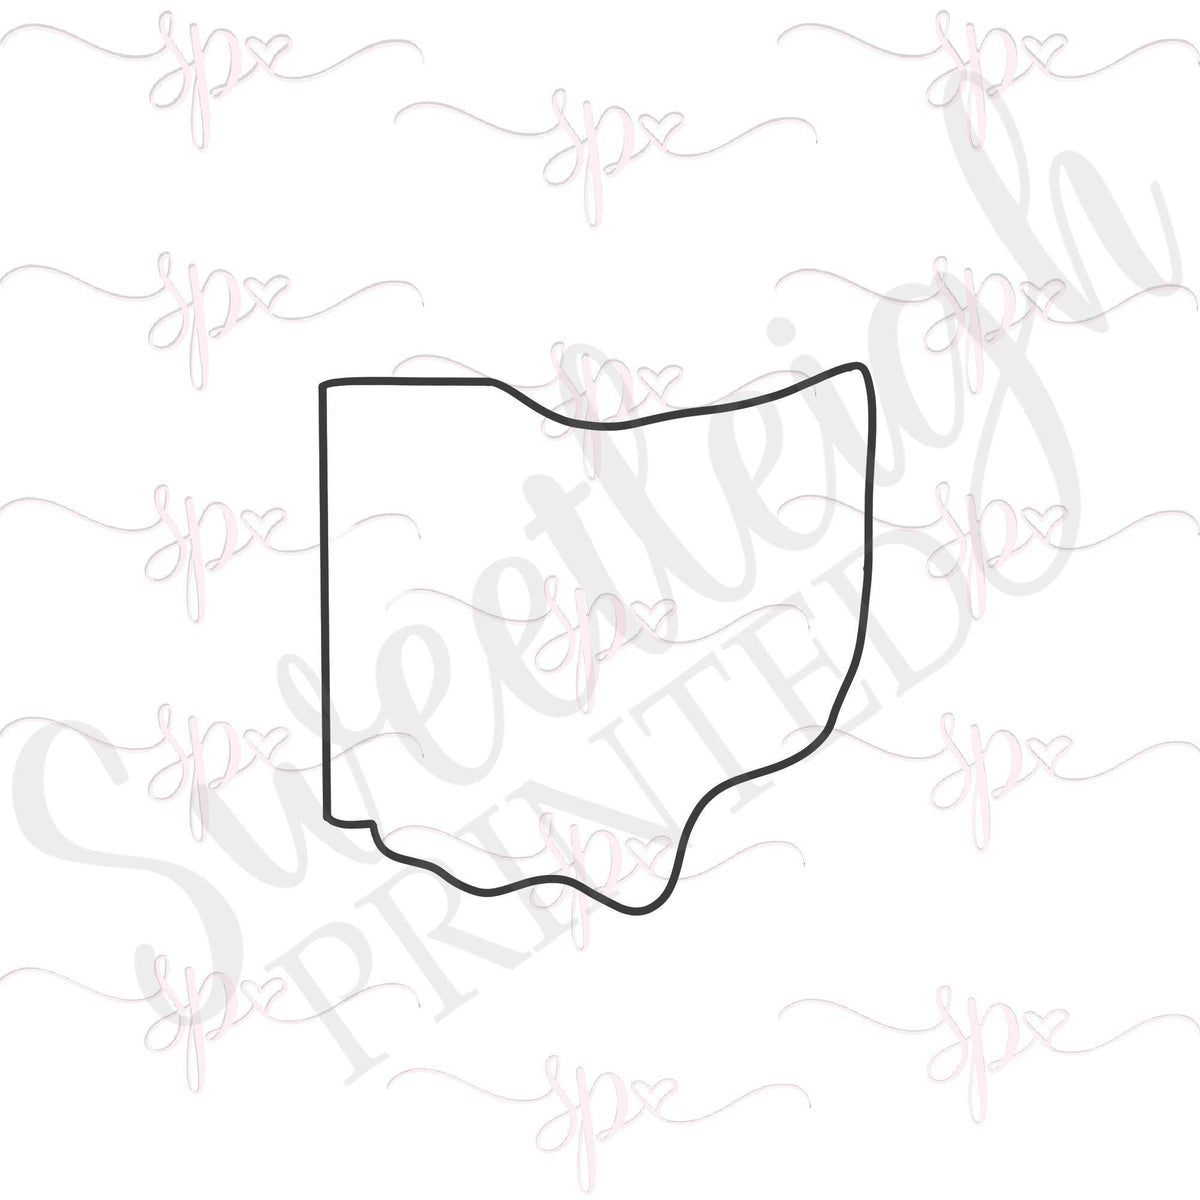 Ohio Cookie Cutter - Sweetleigh 